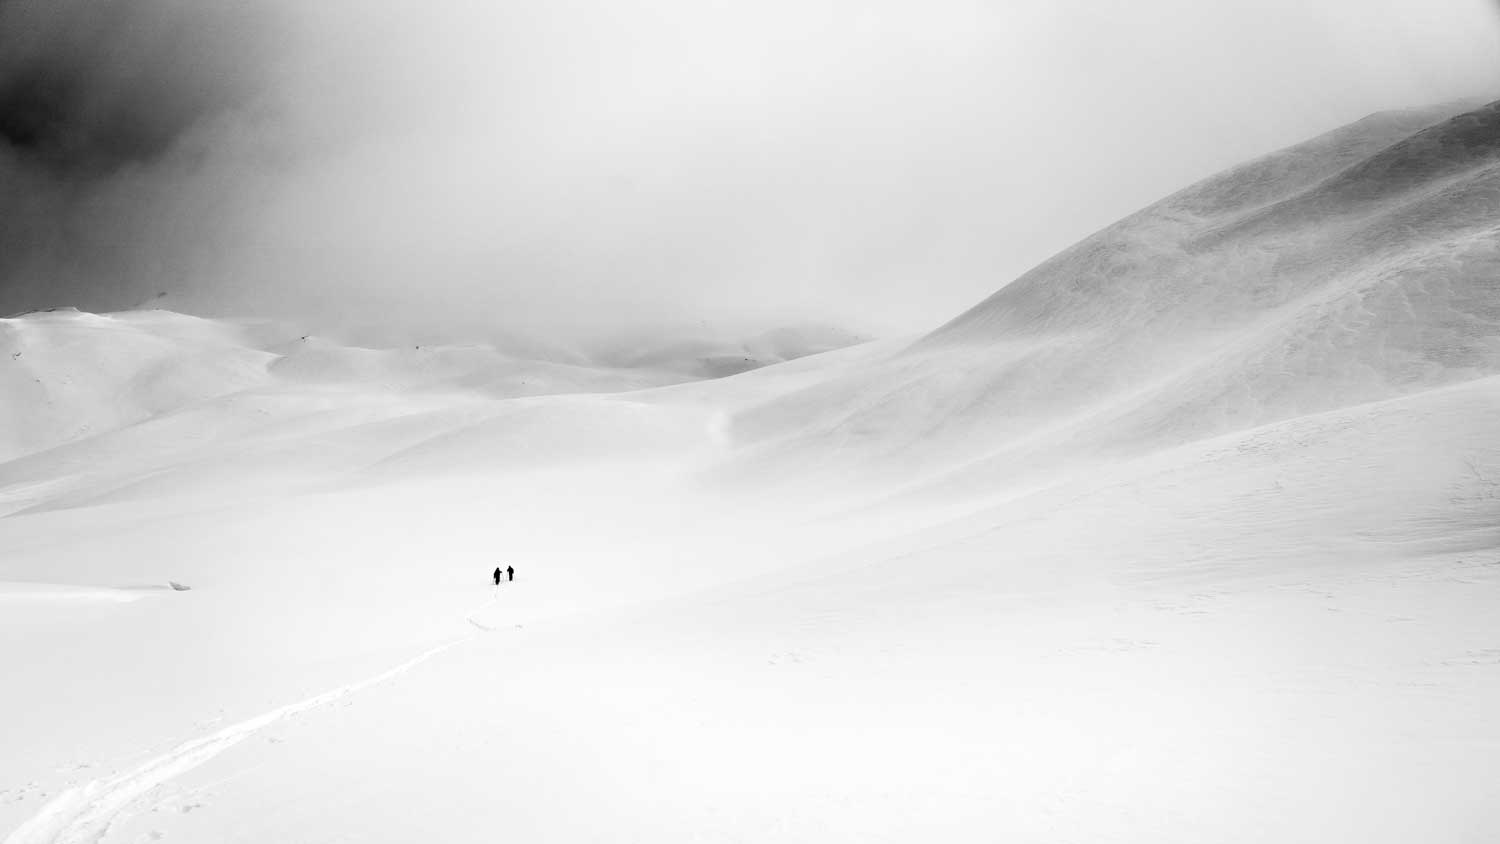 Ski touring in Grands Vallons, Maurienne.